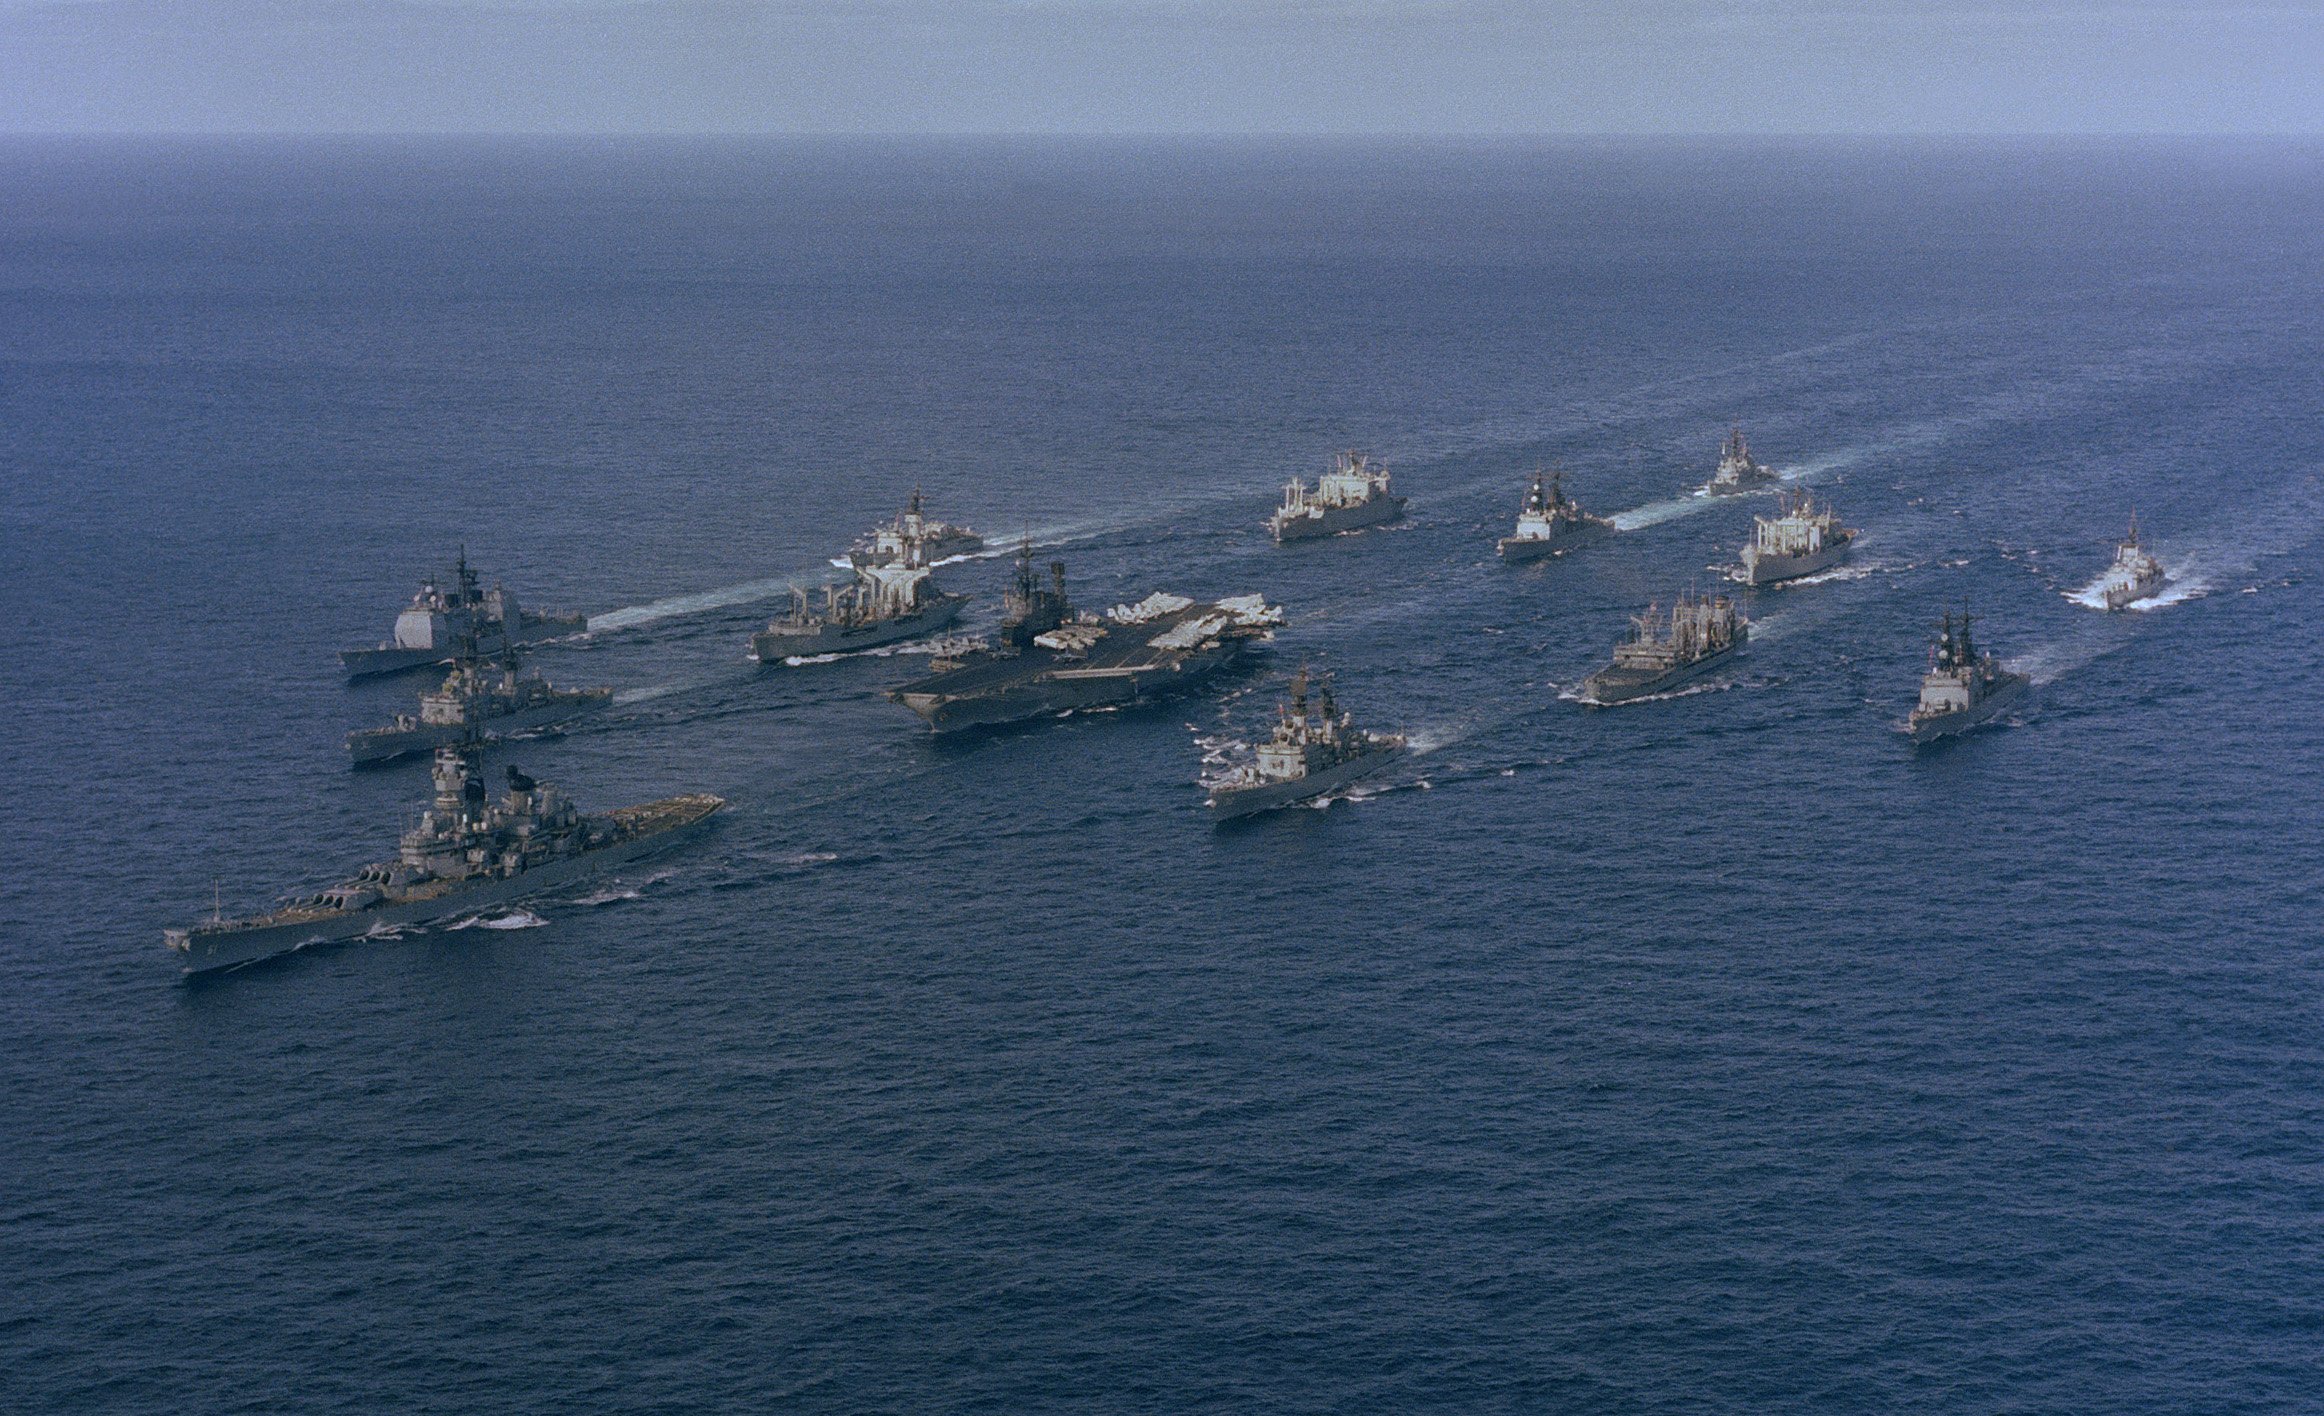 USS Iowa, USS Midway, and other ships of US Navy Battle Group Alpha underway, 1 Dec 1987